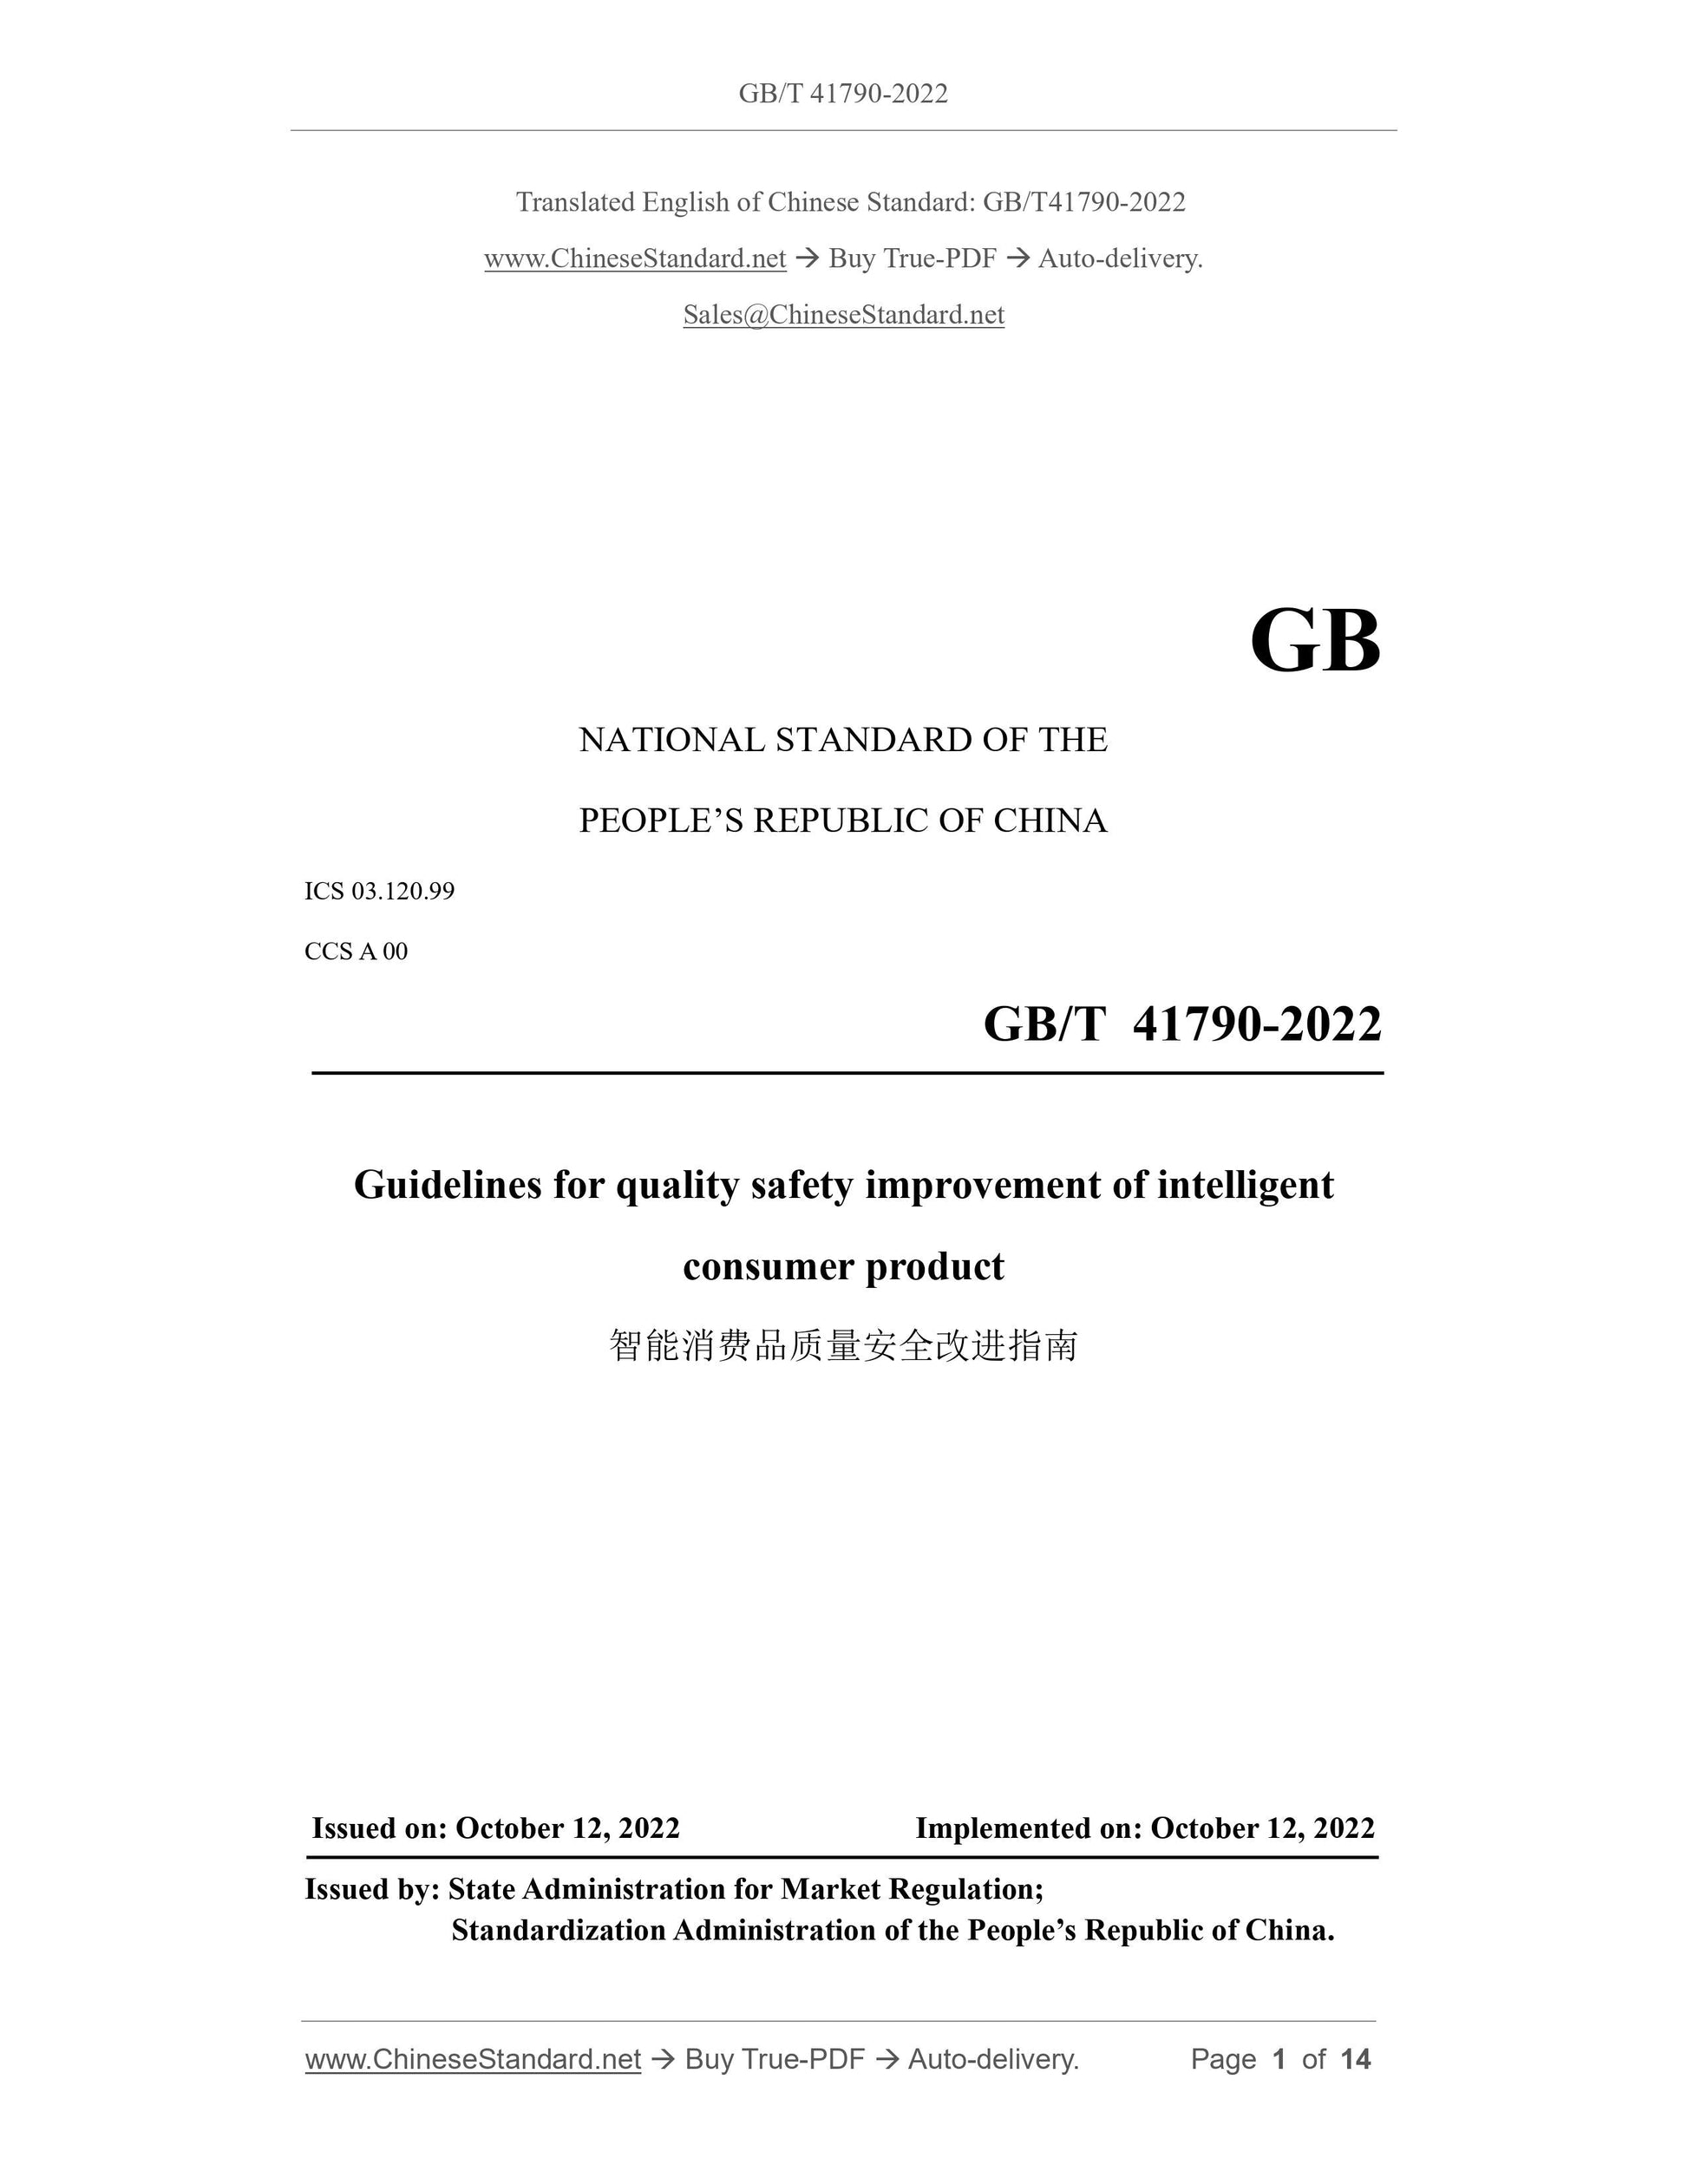 GB/T 41790-2022 Page 1